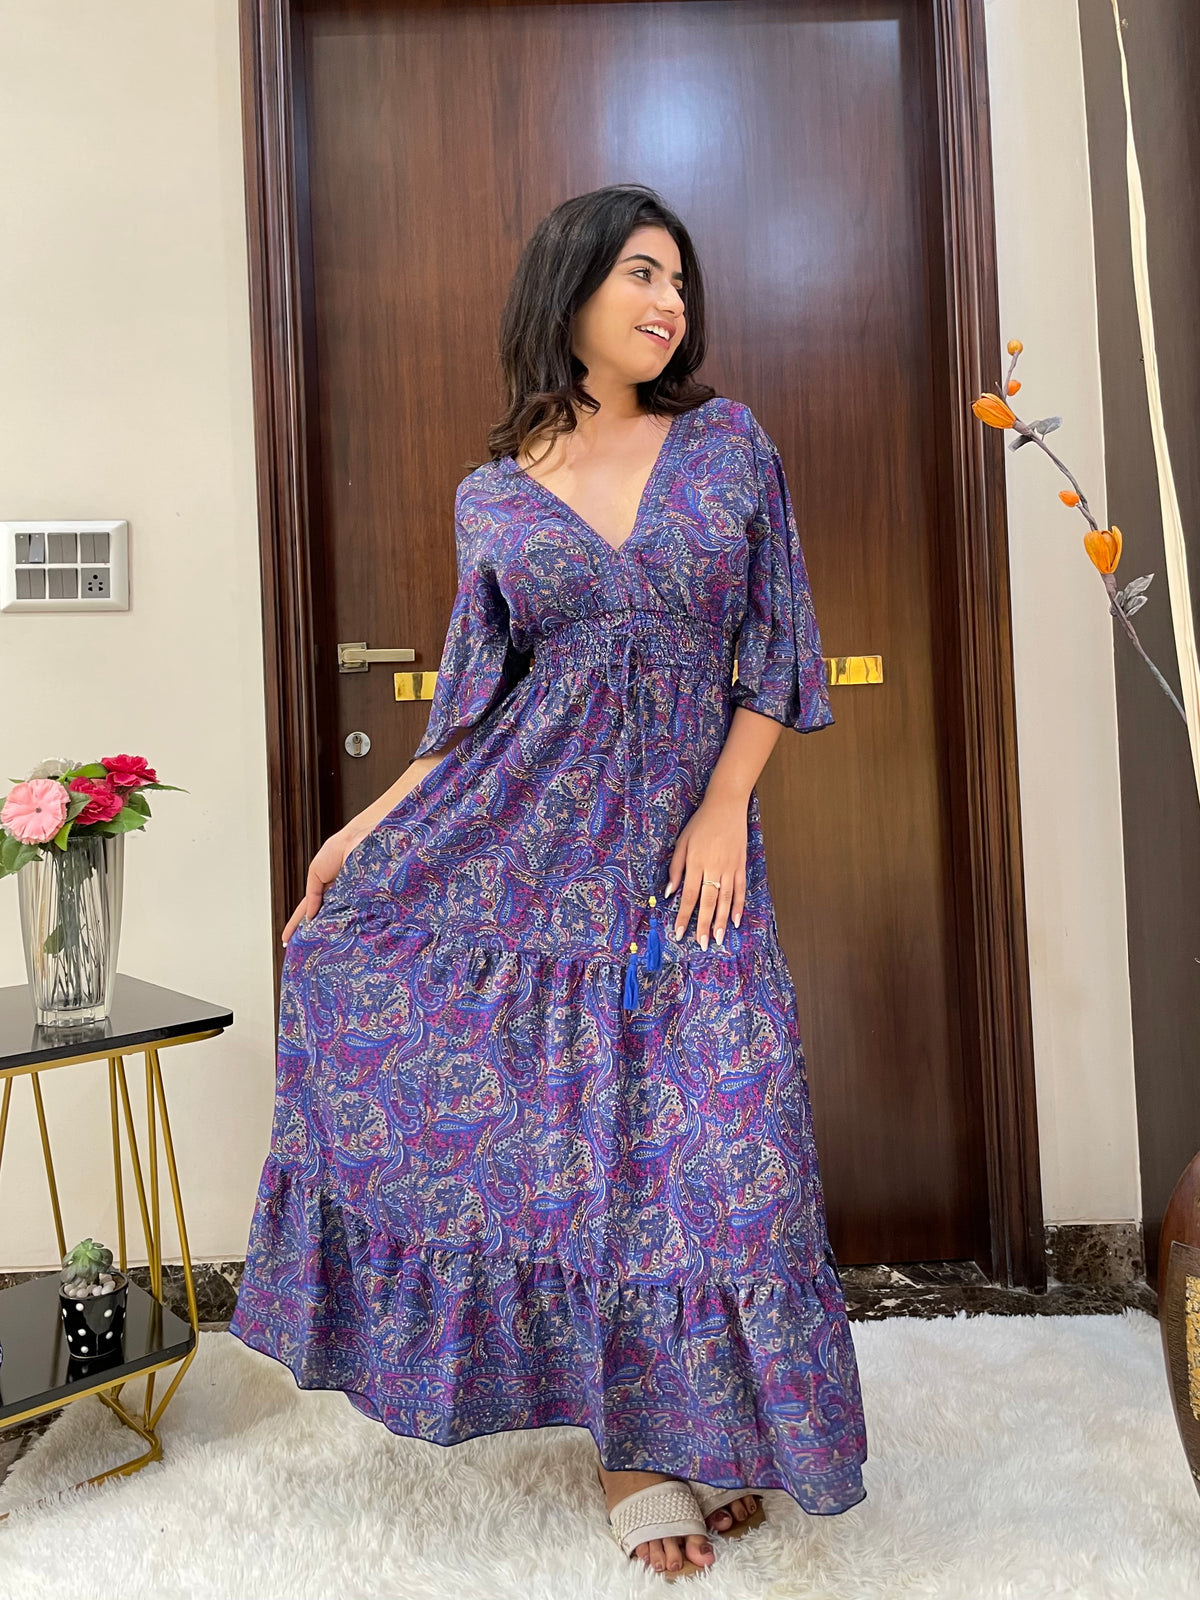 Bell Sleeves Criss Cross Front Boho Printed Maxi Dress - Multicolor